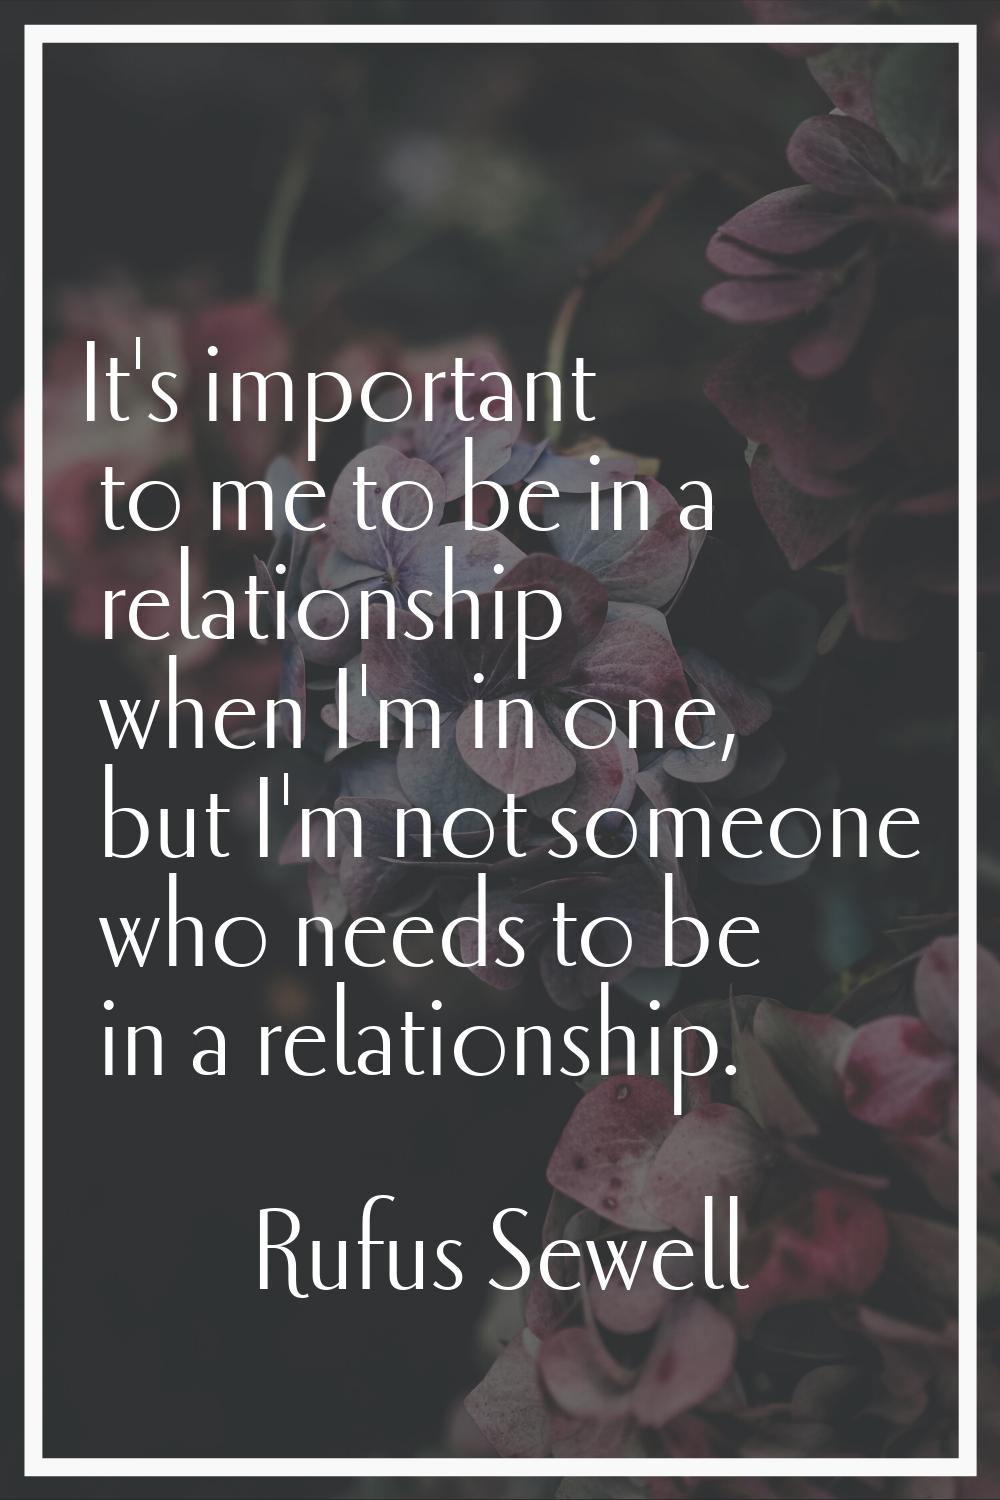 It's important to me to be in a relationship when I'm in one, but I'm not someone who needs to be i